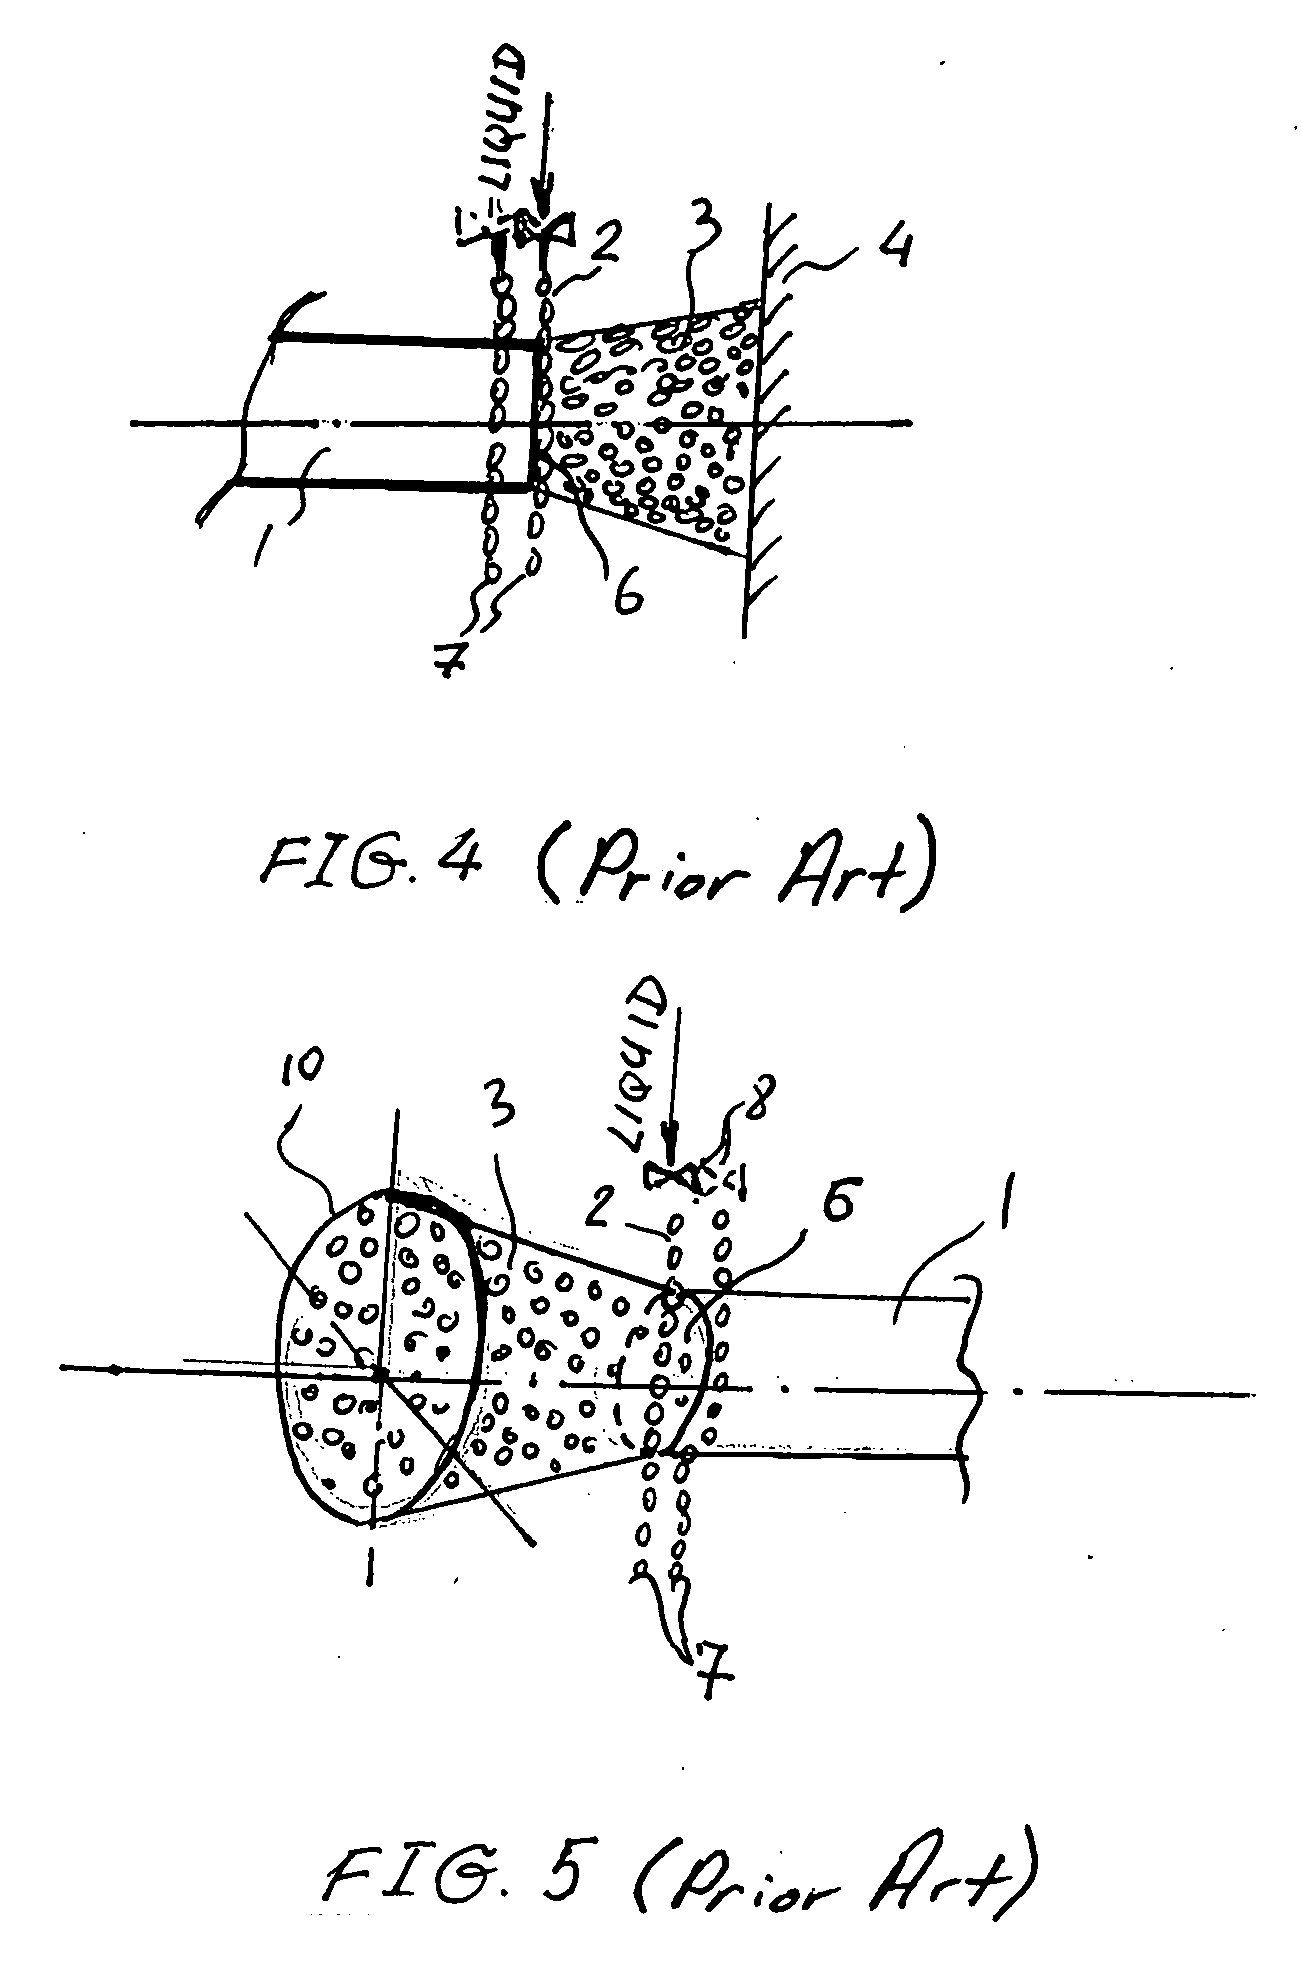 Ultrasound medical stent coating method and device